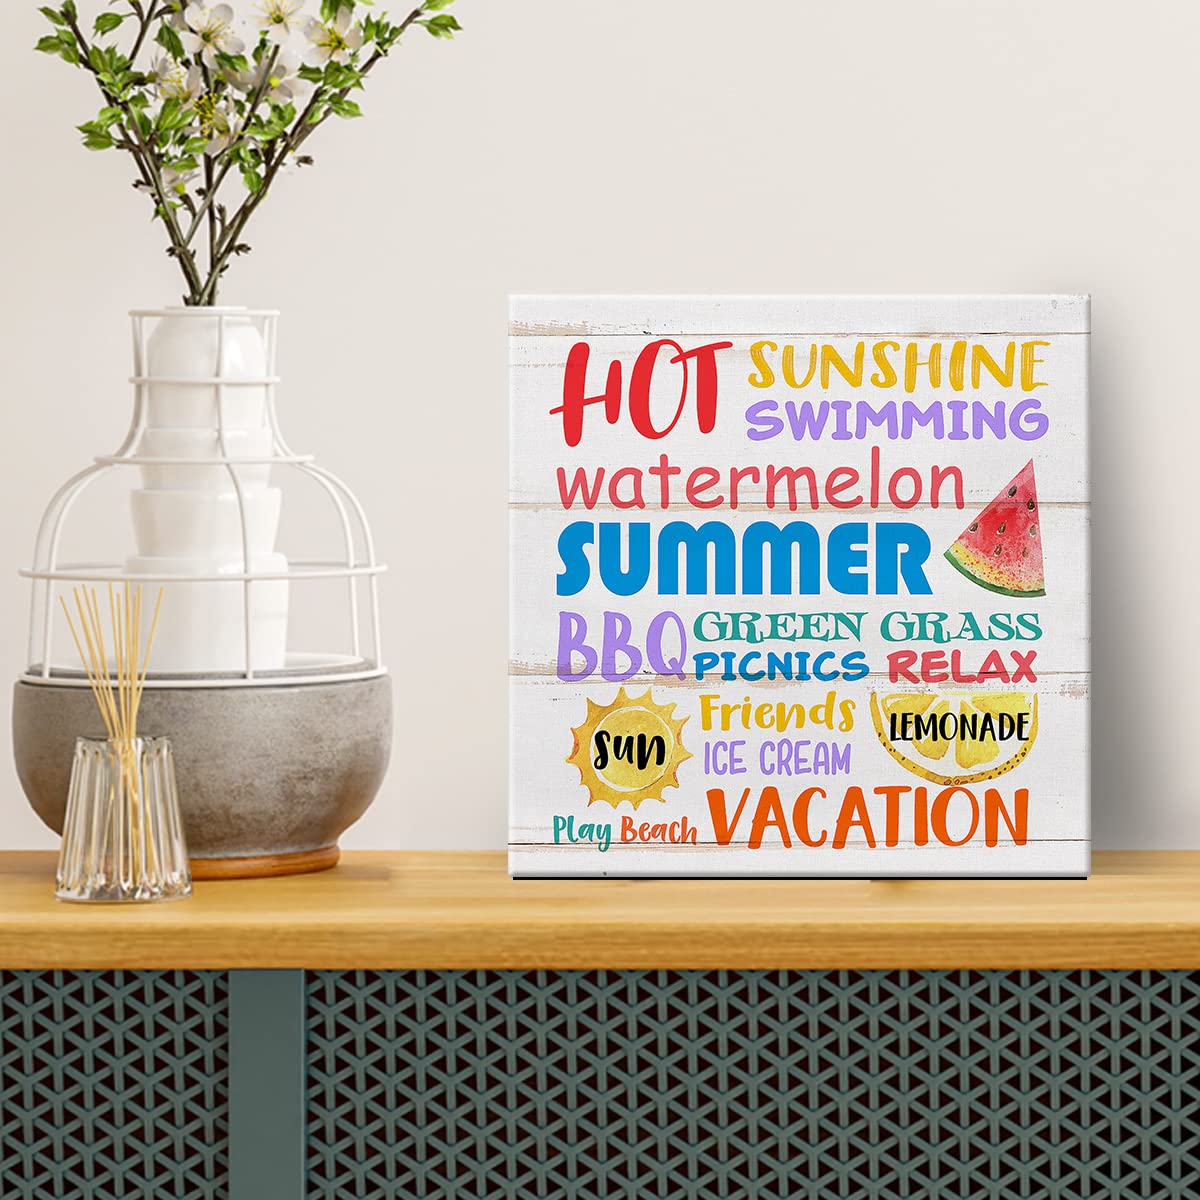 Country Summer Canvas Prints Wall Art Decor Summer Subway Poster Painting Framed Artwork Summer Words Desk Signs Rustic Home Shelf Wall Decoration 8 x 8 Inch